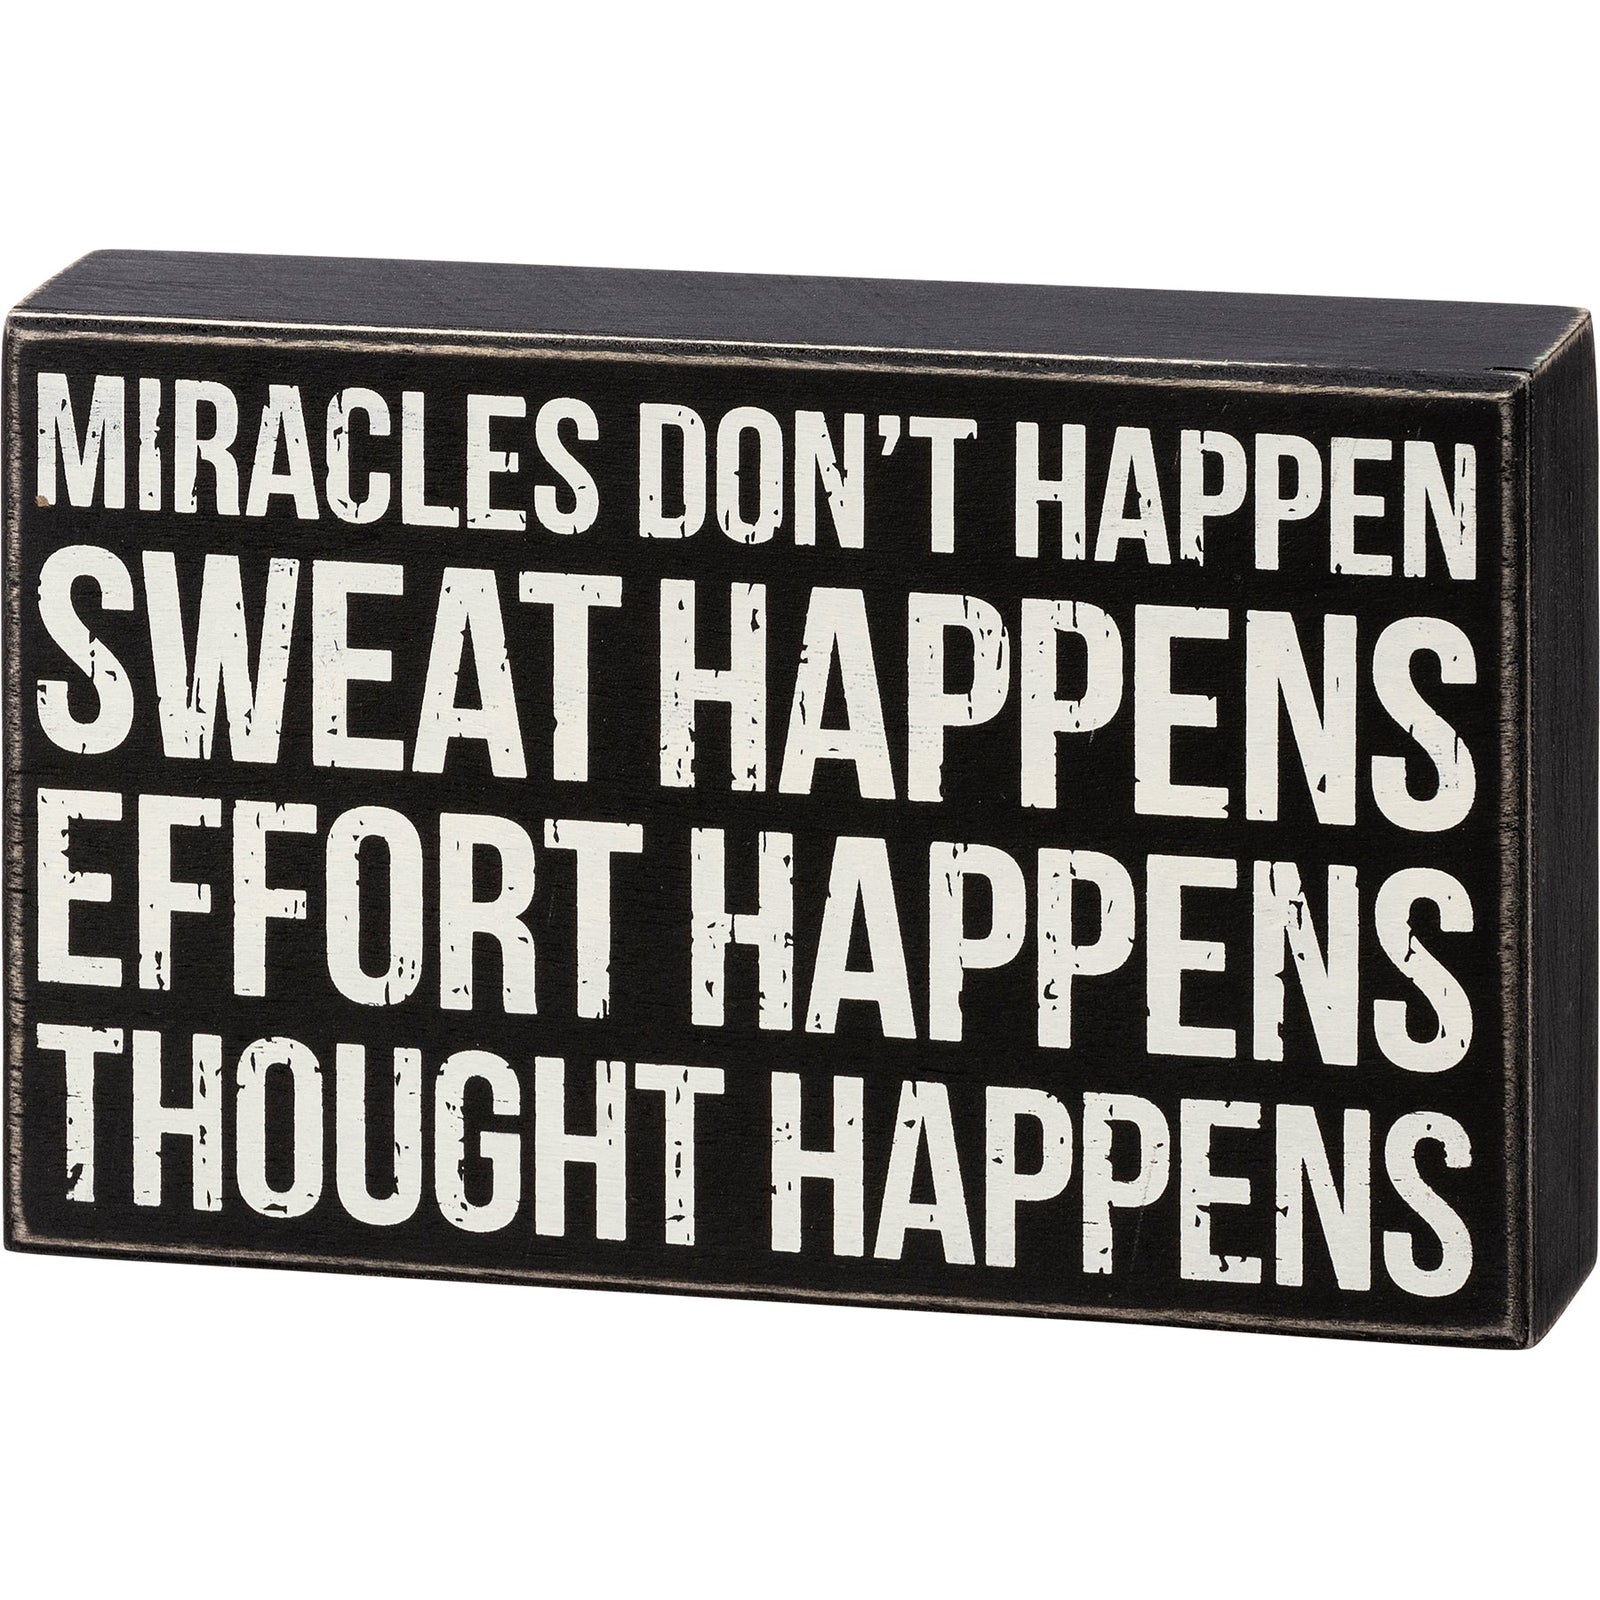 Thought Happens Box Sign | Classic Black & White Wooden Sign Display | 8" x 5"